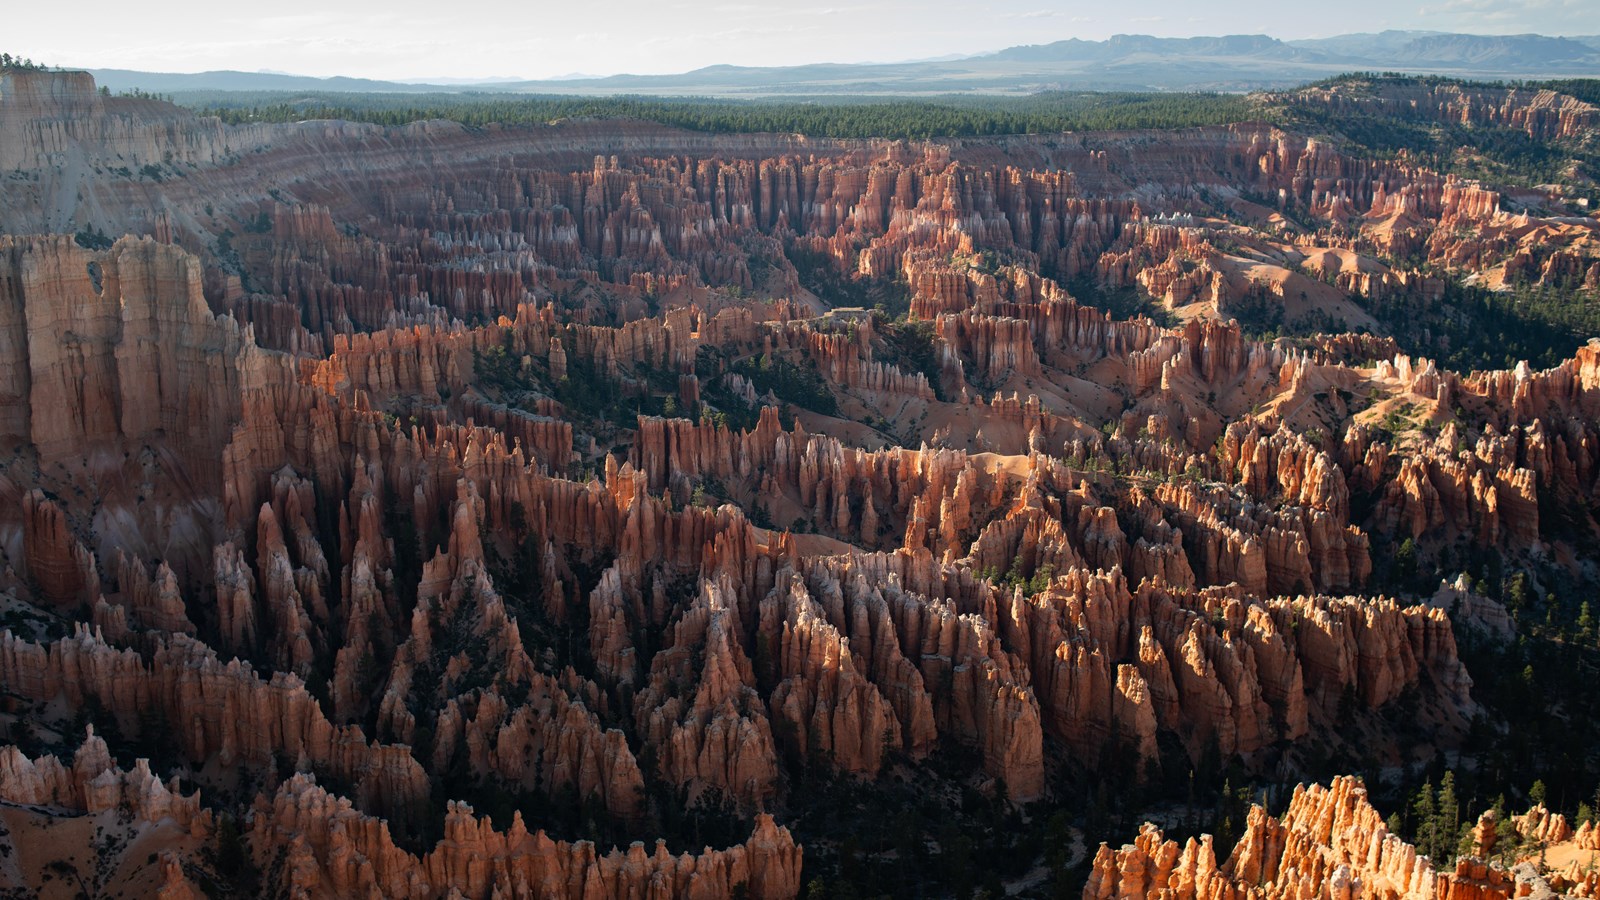 A red rock and forested landscape filled with rock spires